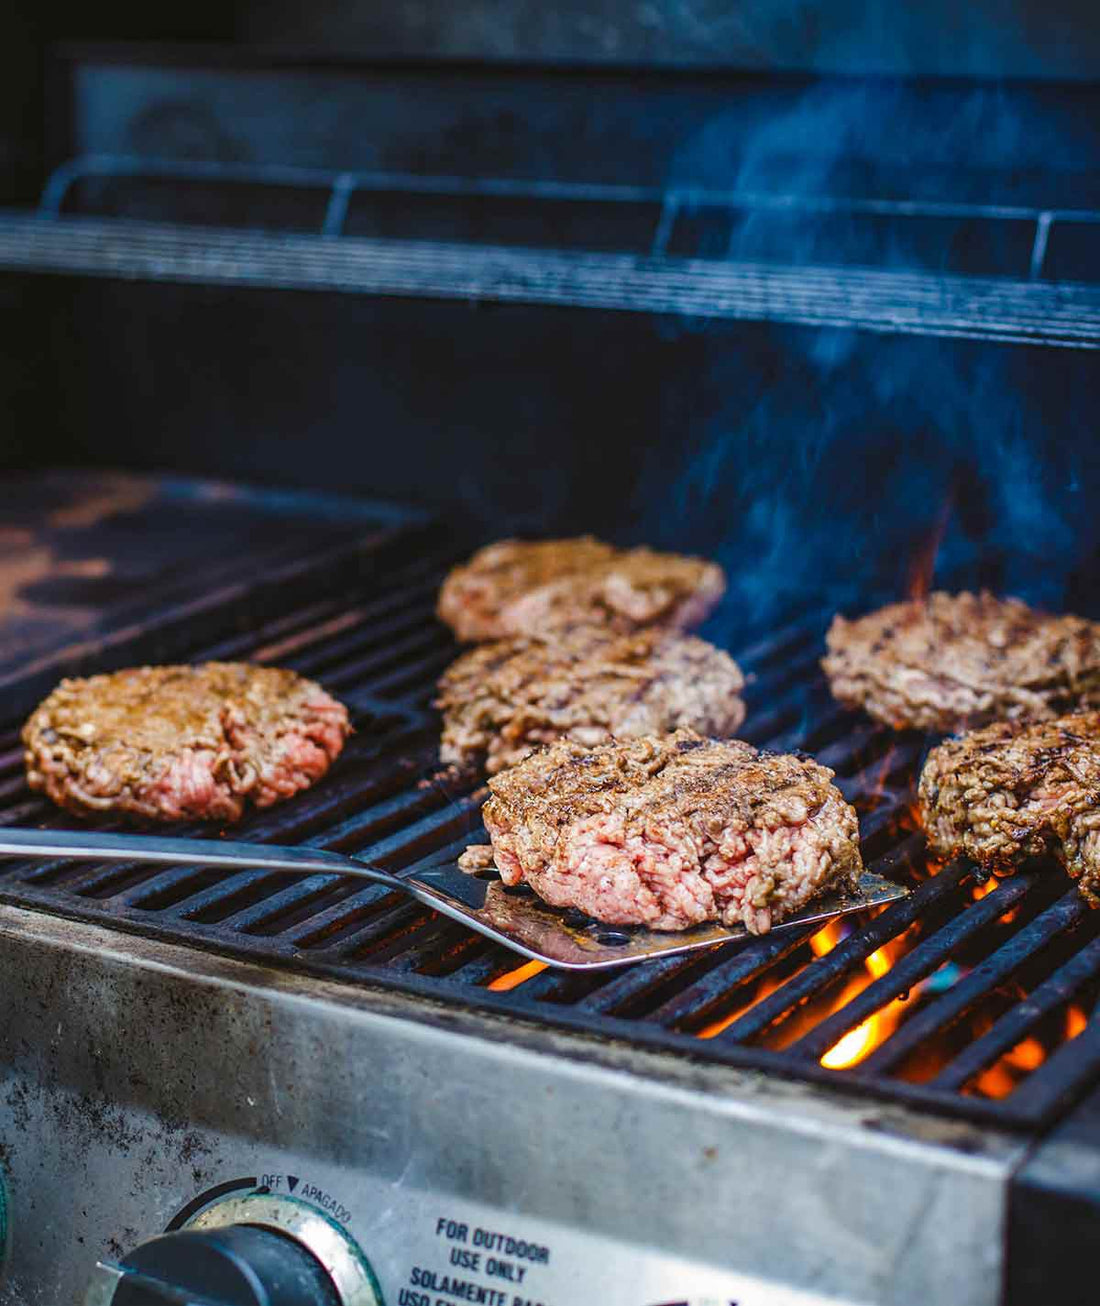 12 Grilling Tips From our Recipe Testers for Summer 2021